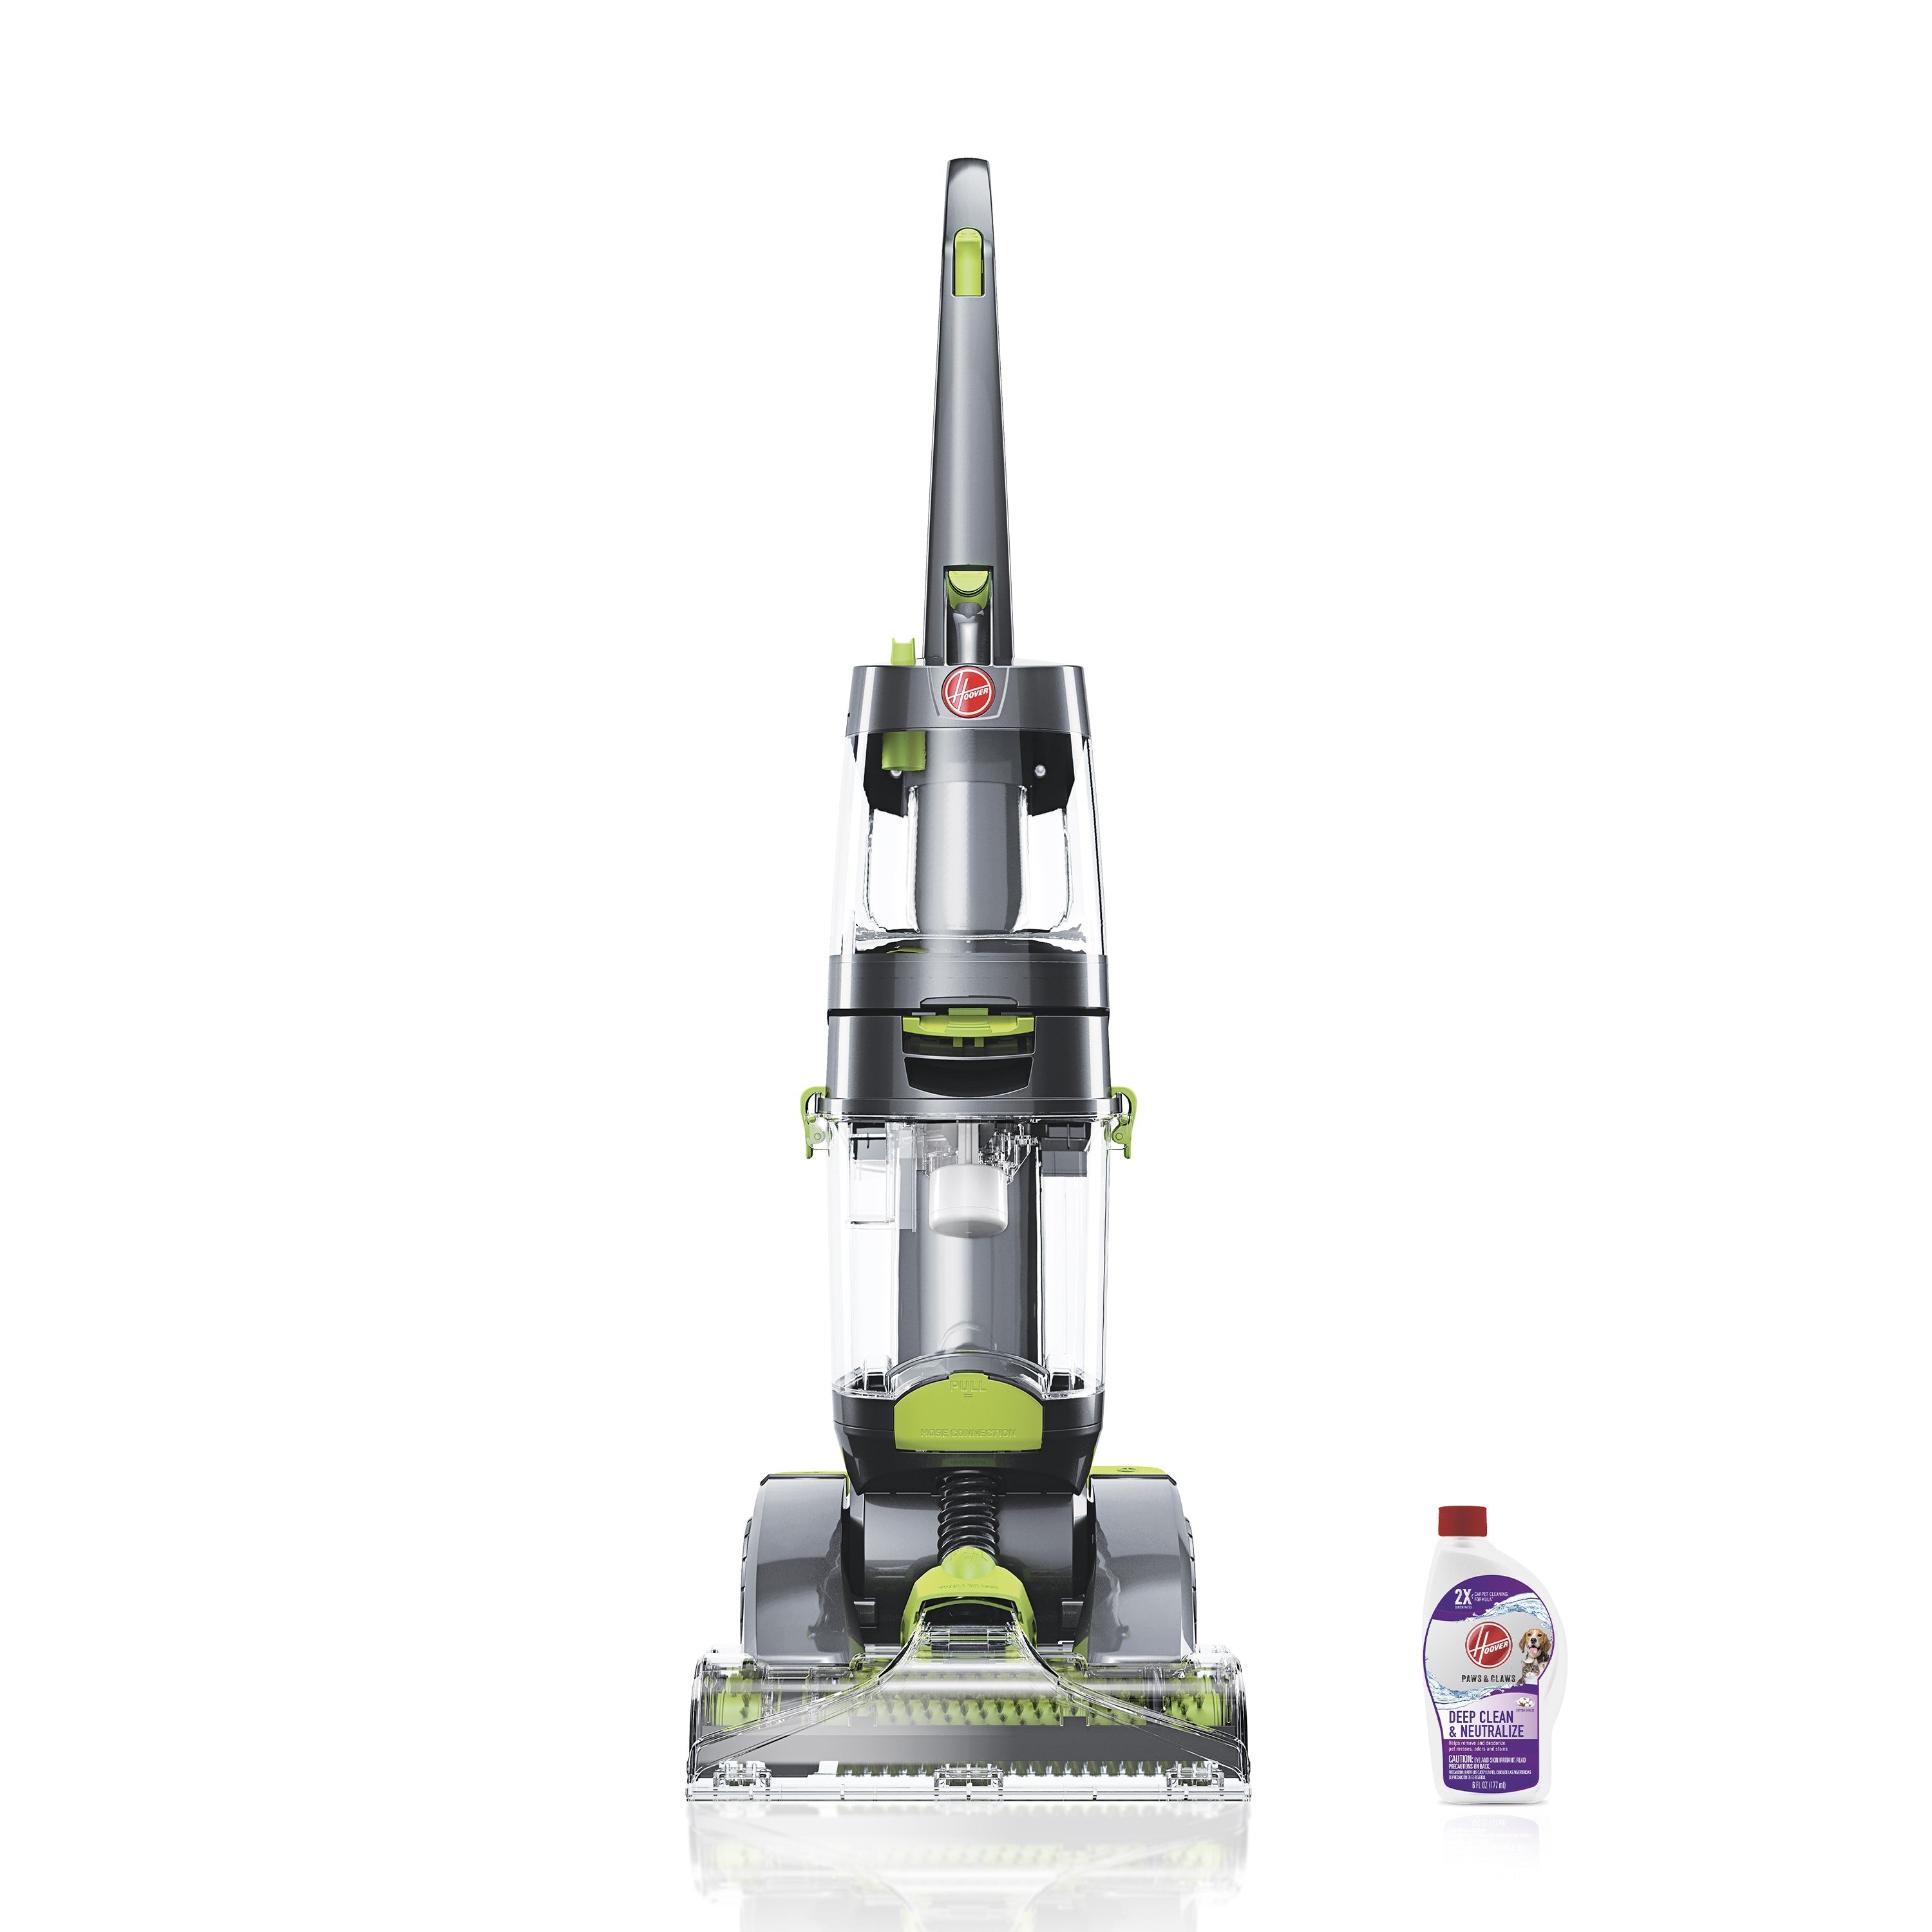 Deep Carpet Cleaner Machine - Best in Class Cleaning Performance